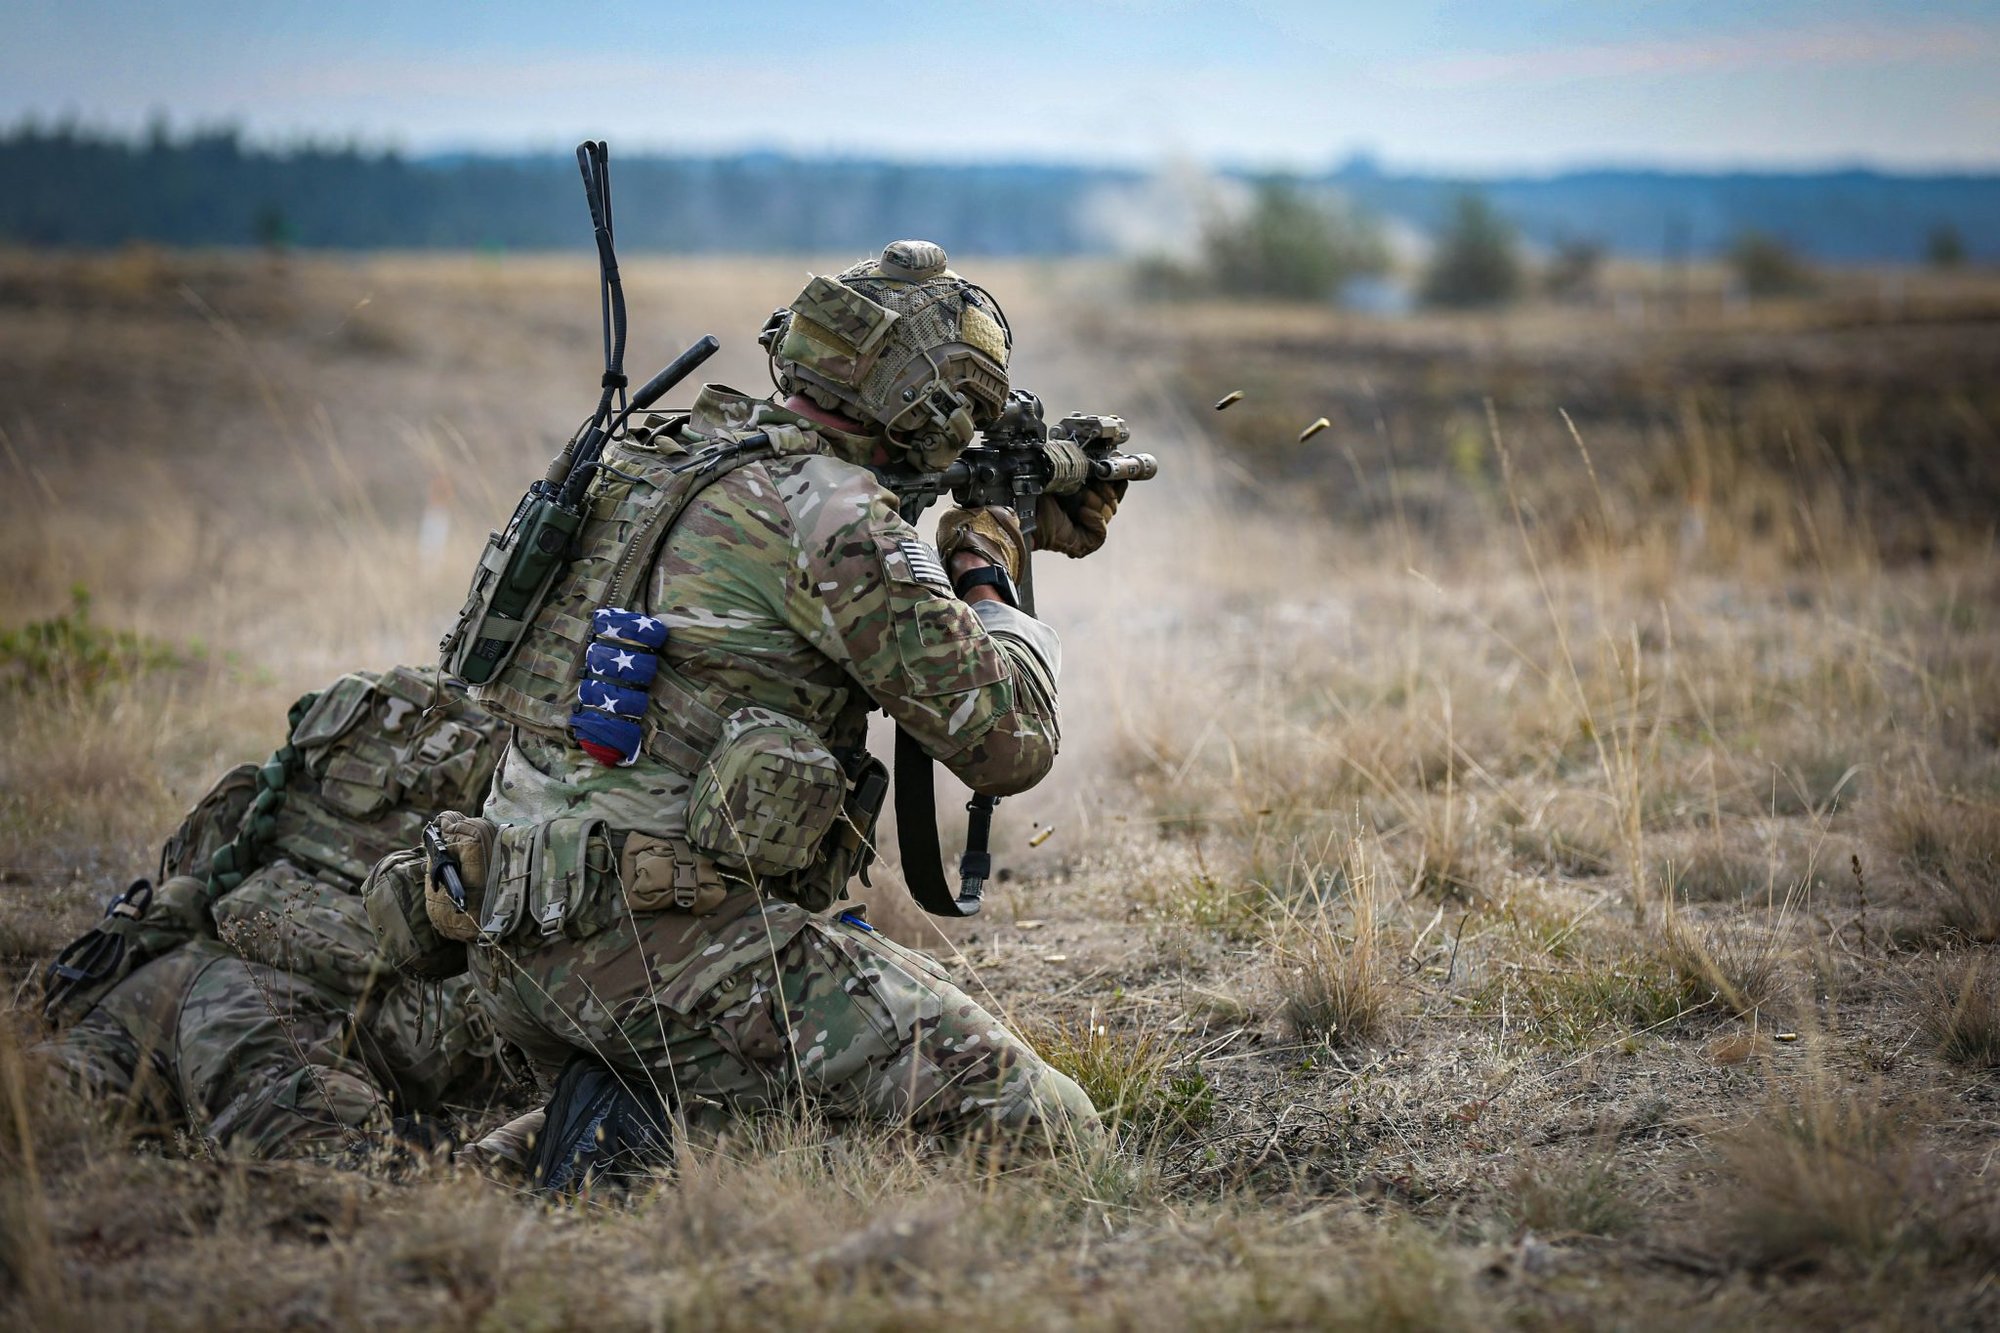 U.S. Army Rangers of the 75th Ranger Regiment conduct field training for a unit TFT (Task Force Training) operation on Joint Base Lewis – McChord, Wa., Aug. 20, 2019. Rangers use this type of training to maintain a high level of mission readiness. (U.S. Army photo by Spc. Garrett Shreffler)